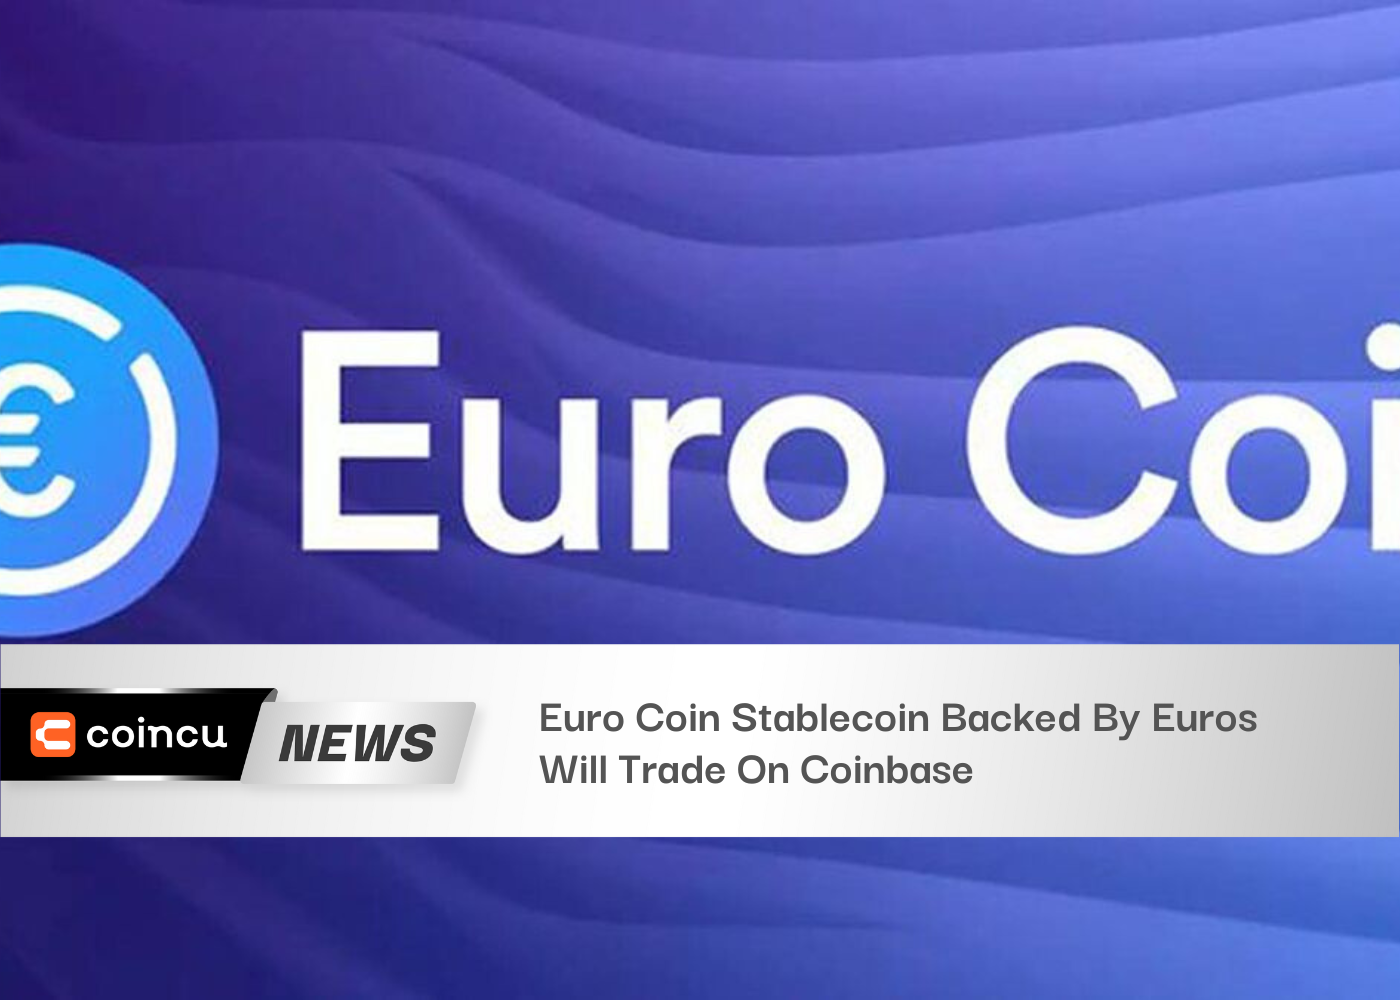 Euro Coin Stablecoin Backed By Euros